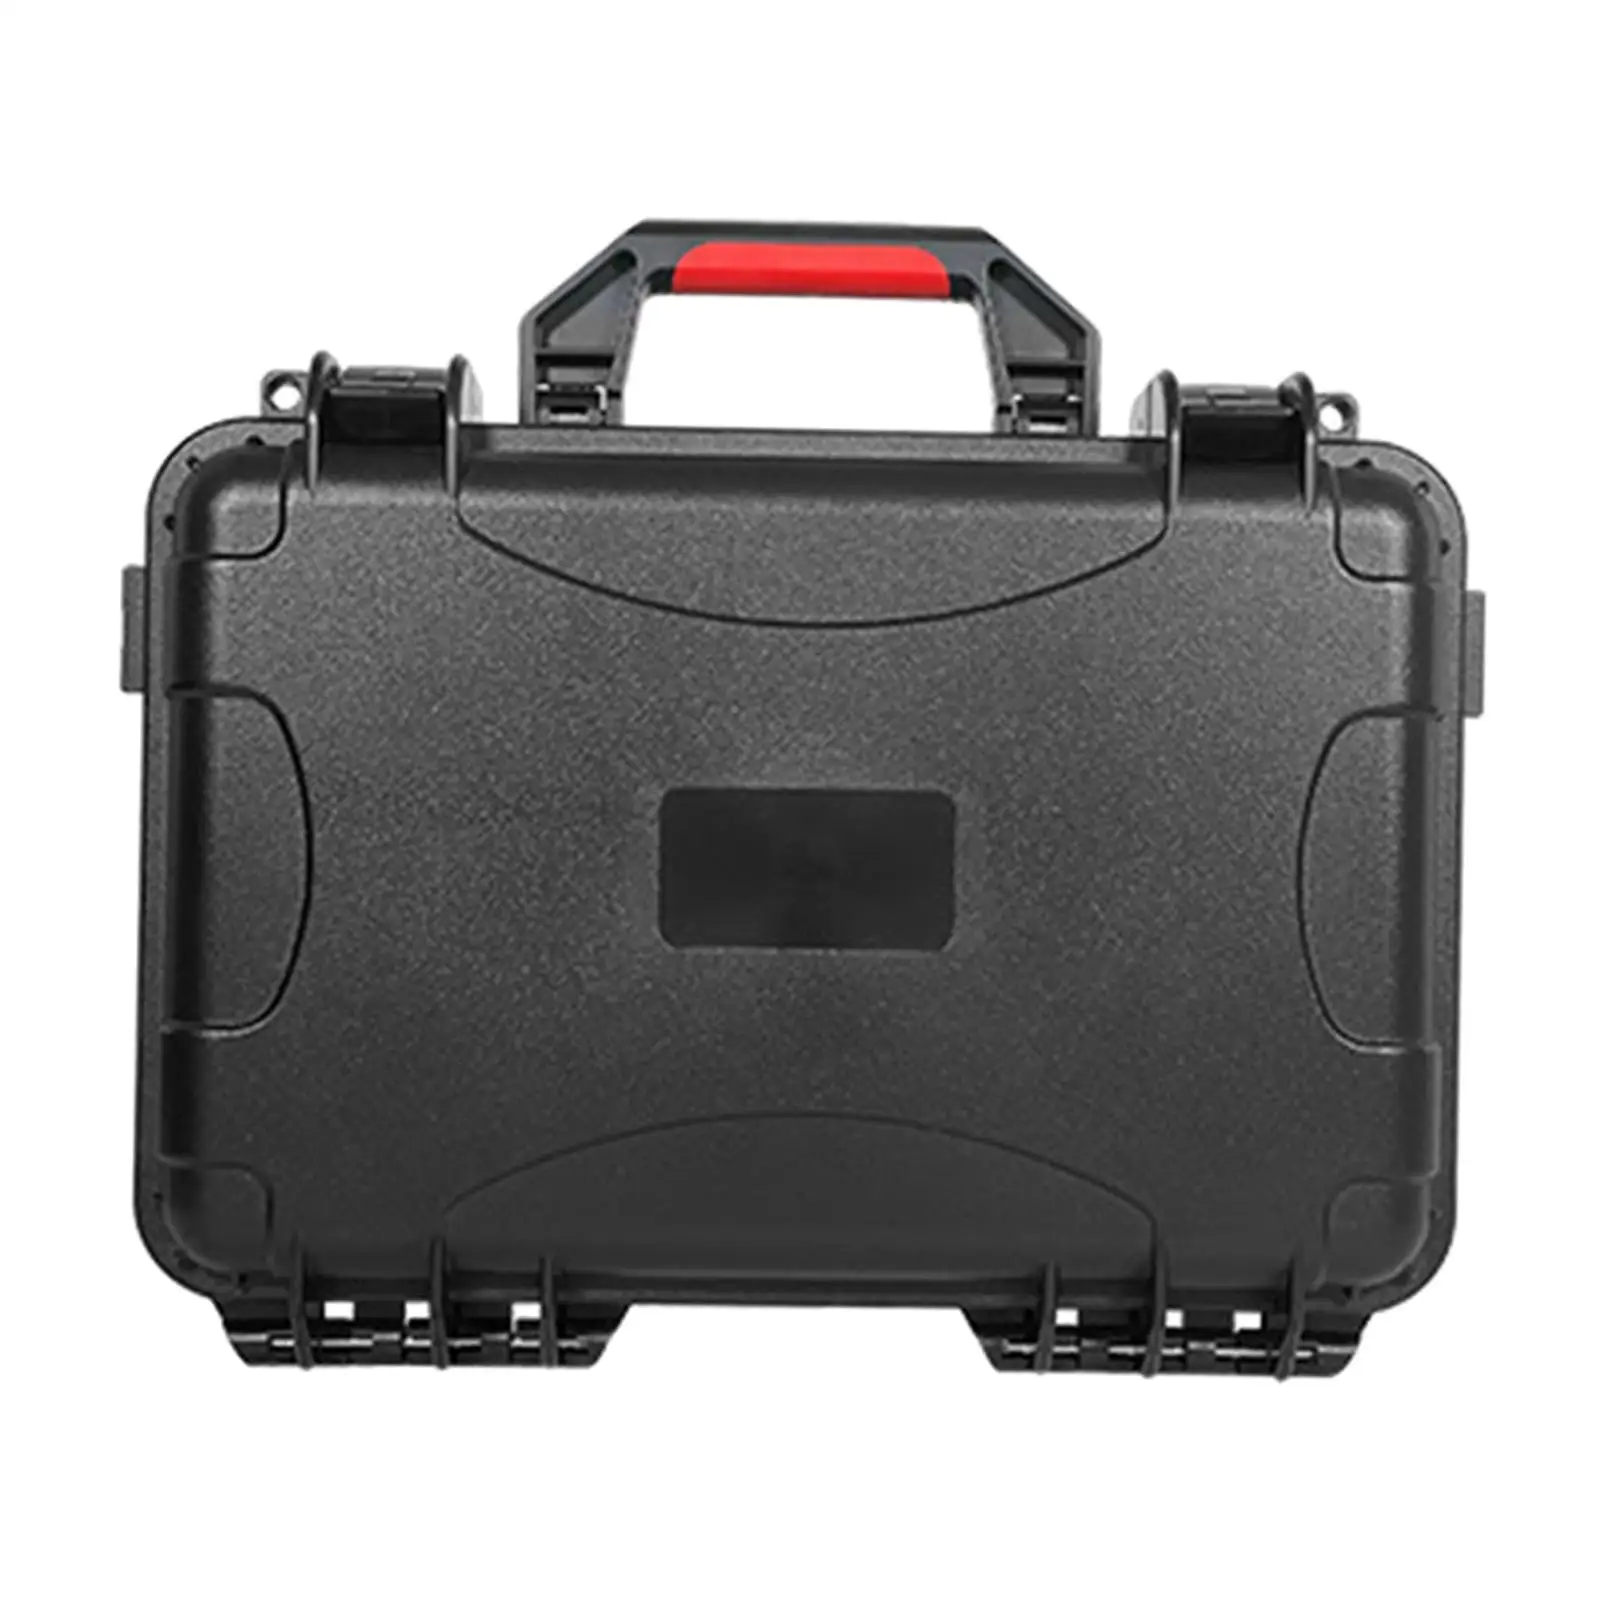 Travel Hard Shell Case Organizer Tool Storage Organizer Drone Body Carrying Case for Hiking Safety Outdoor Outdoor Photography